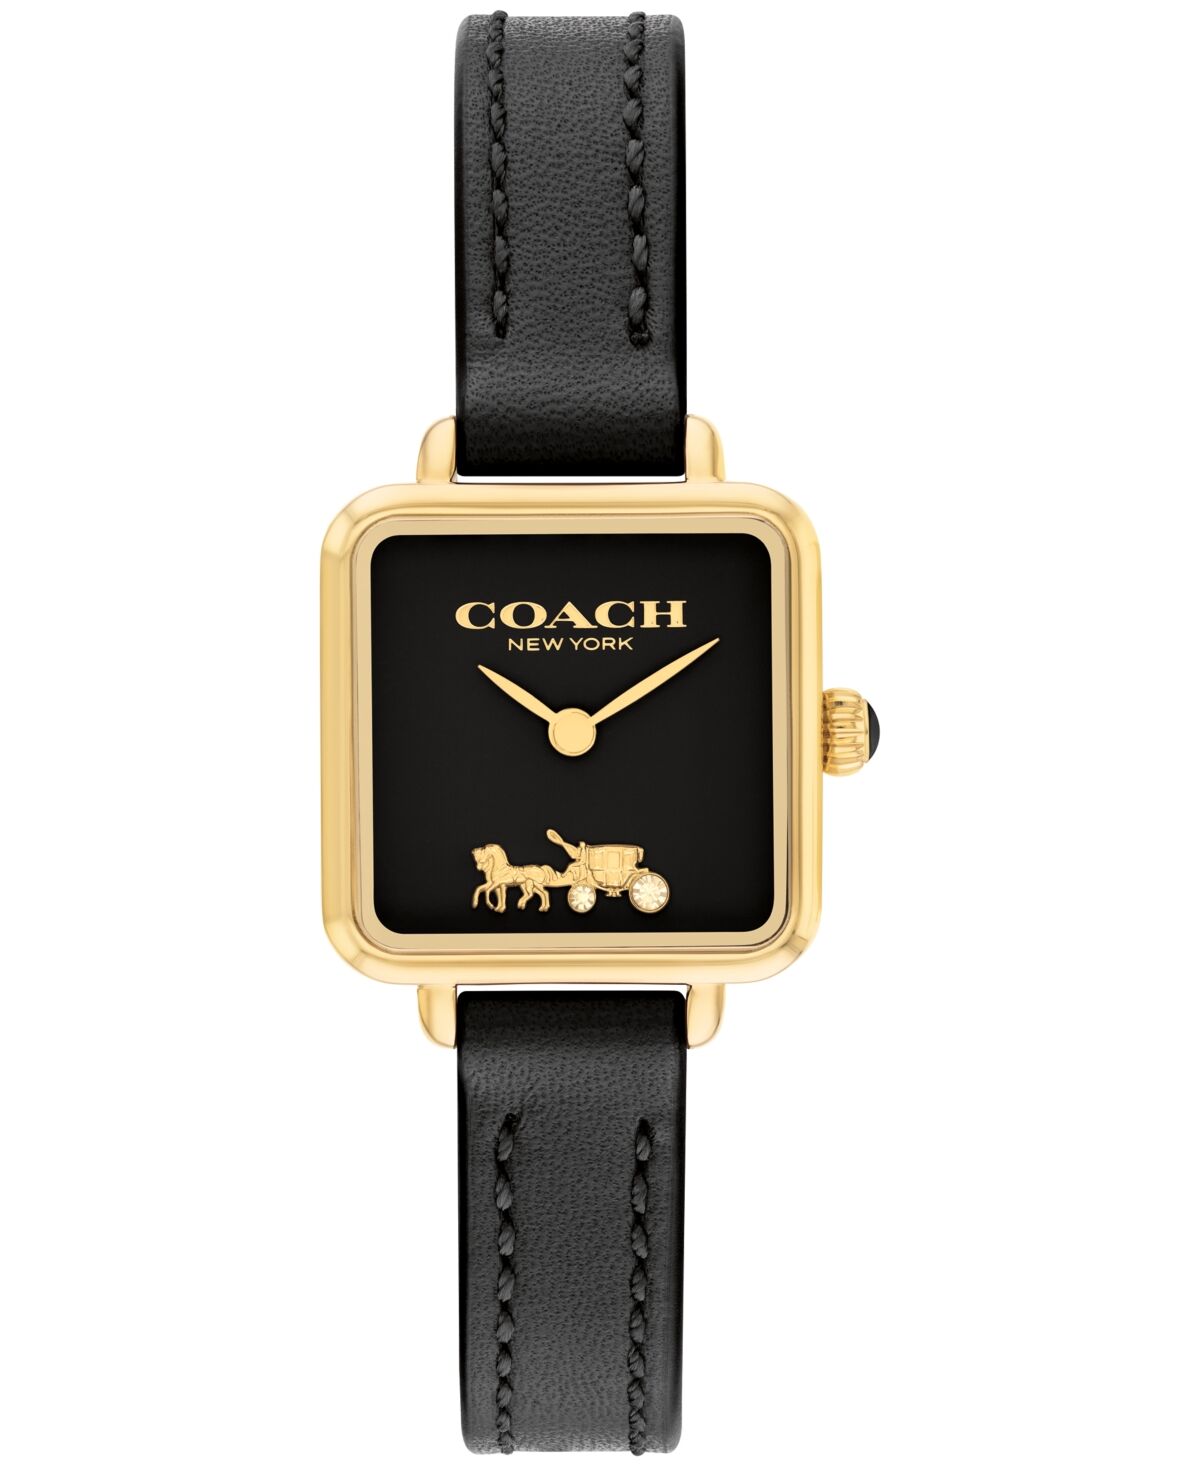 Coach Women's Cass Signature Horse and Carriage Black Leather Strap Watch, 22mm - Black